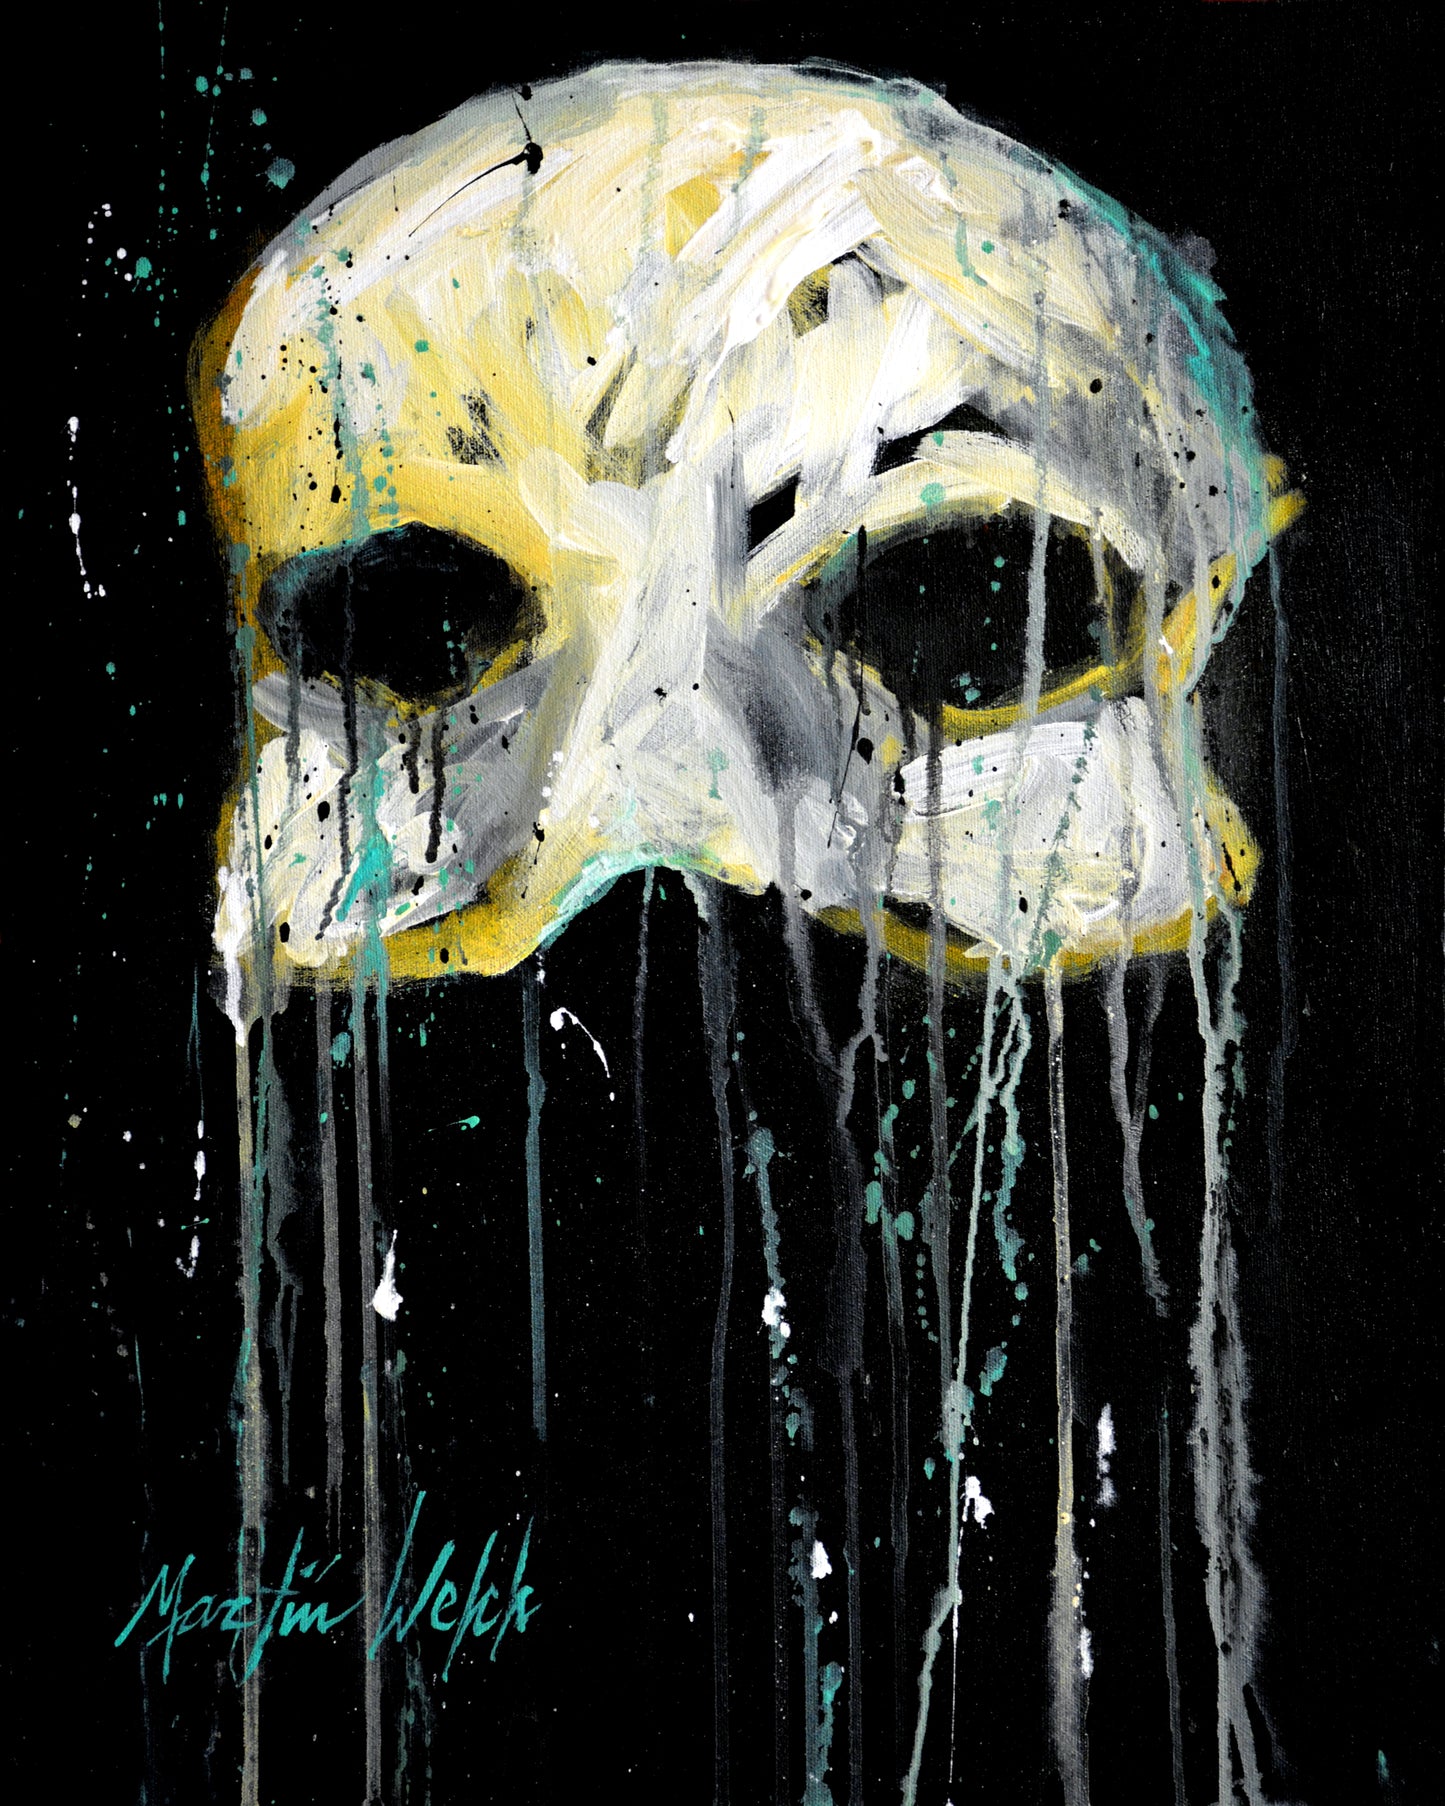 Mysterious - Mask - 11"x14" Print